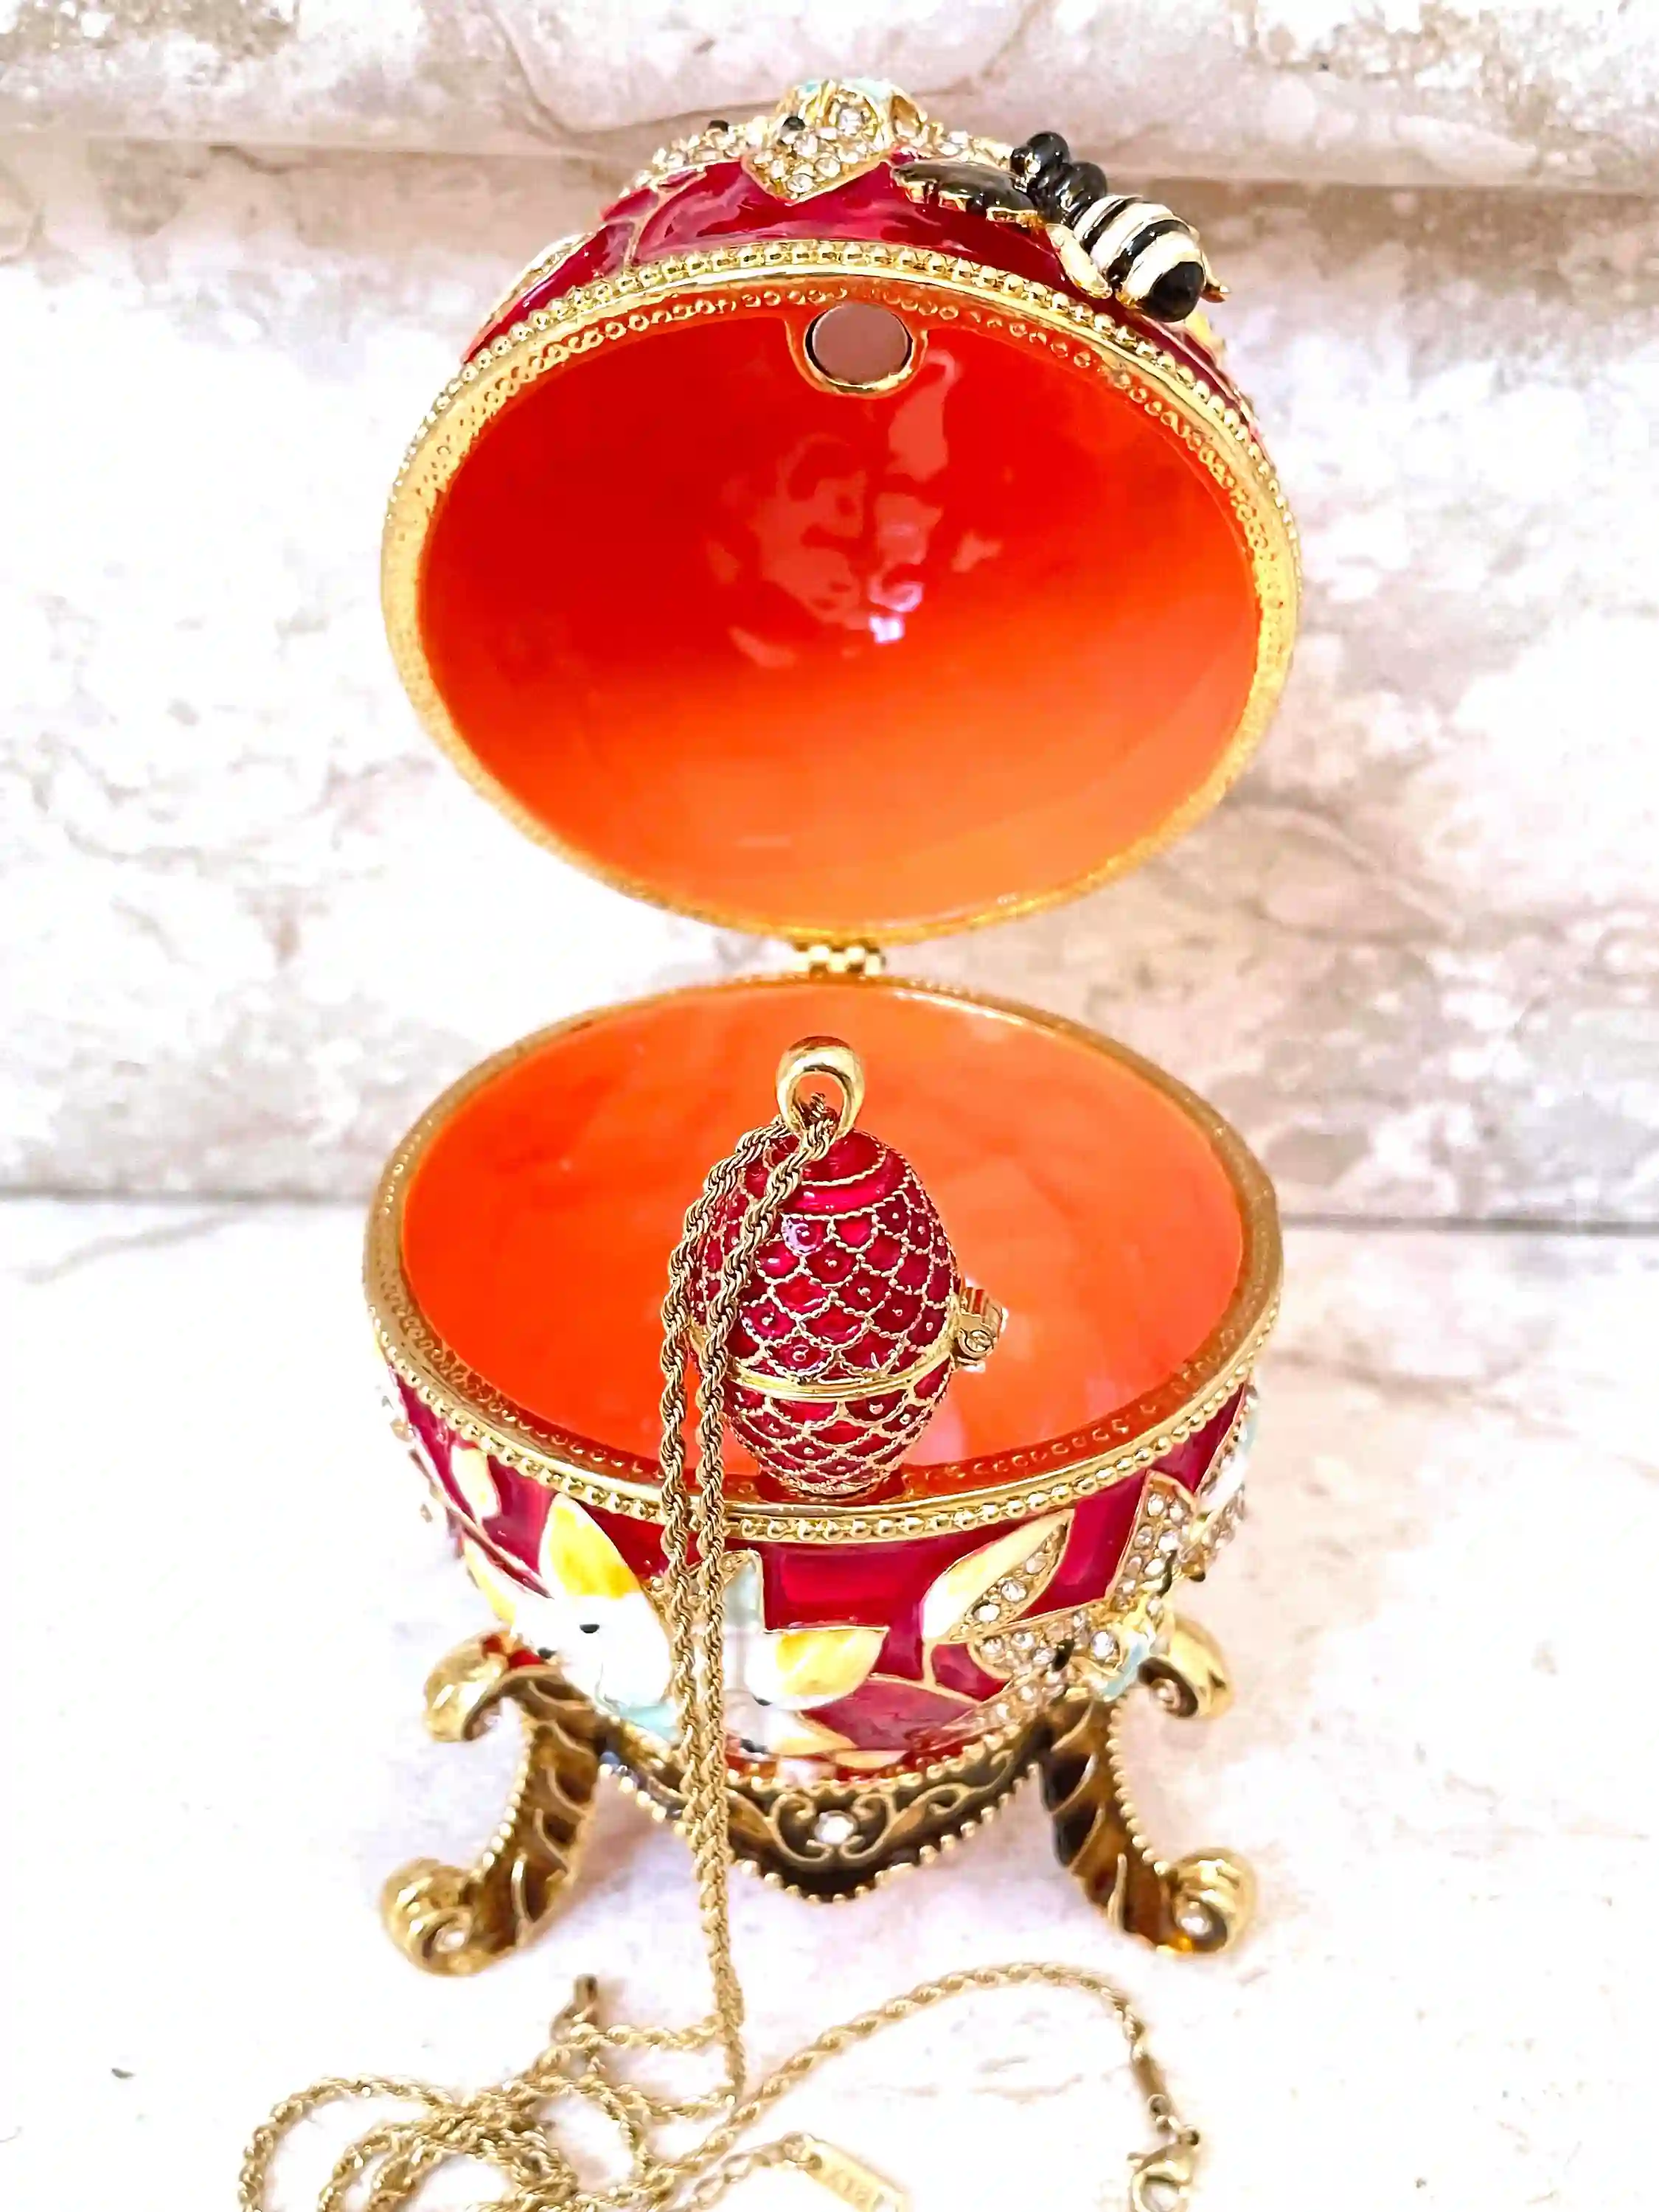 Red Faberge Egg Jewelry box Pomegranate Gift + Fabrege egg Necklace 24K GOLD HANDMADE Mothers Day gift 450 Austrian Crystals HANDSET 10CT 